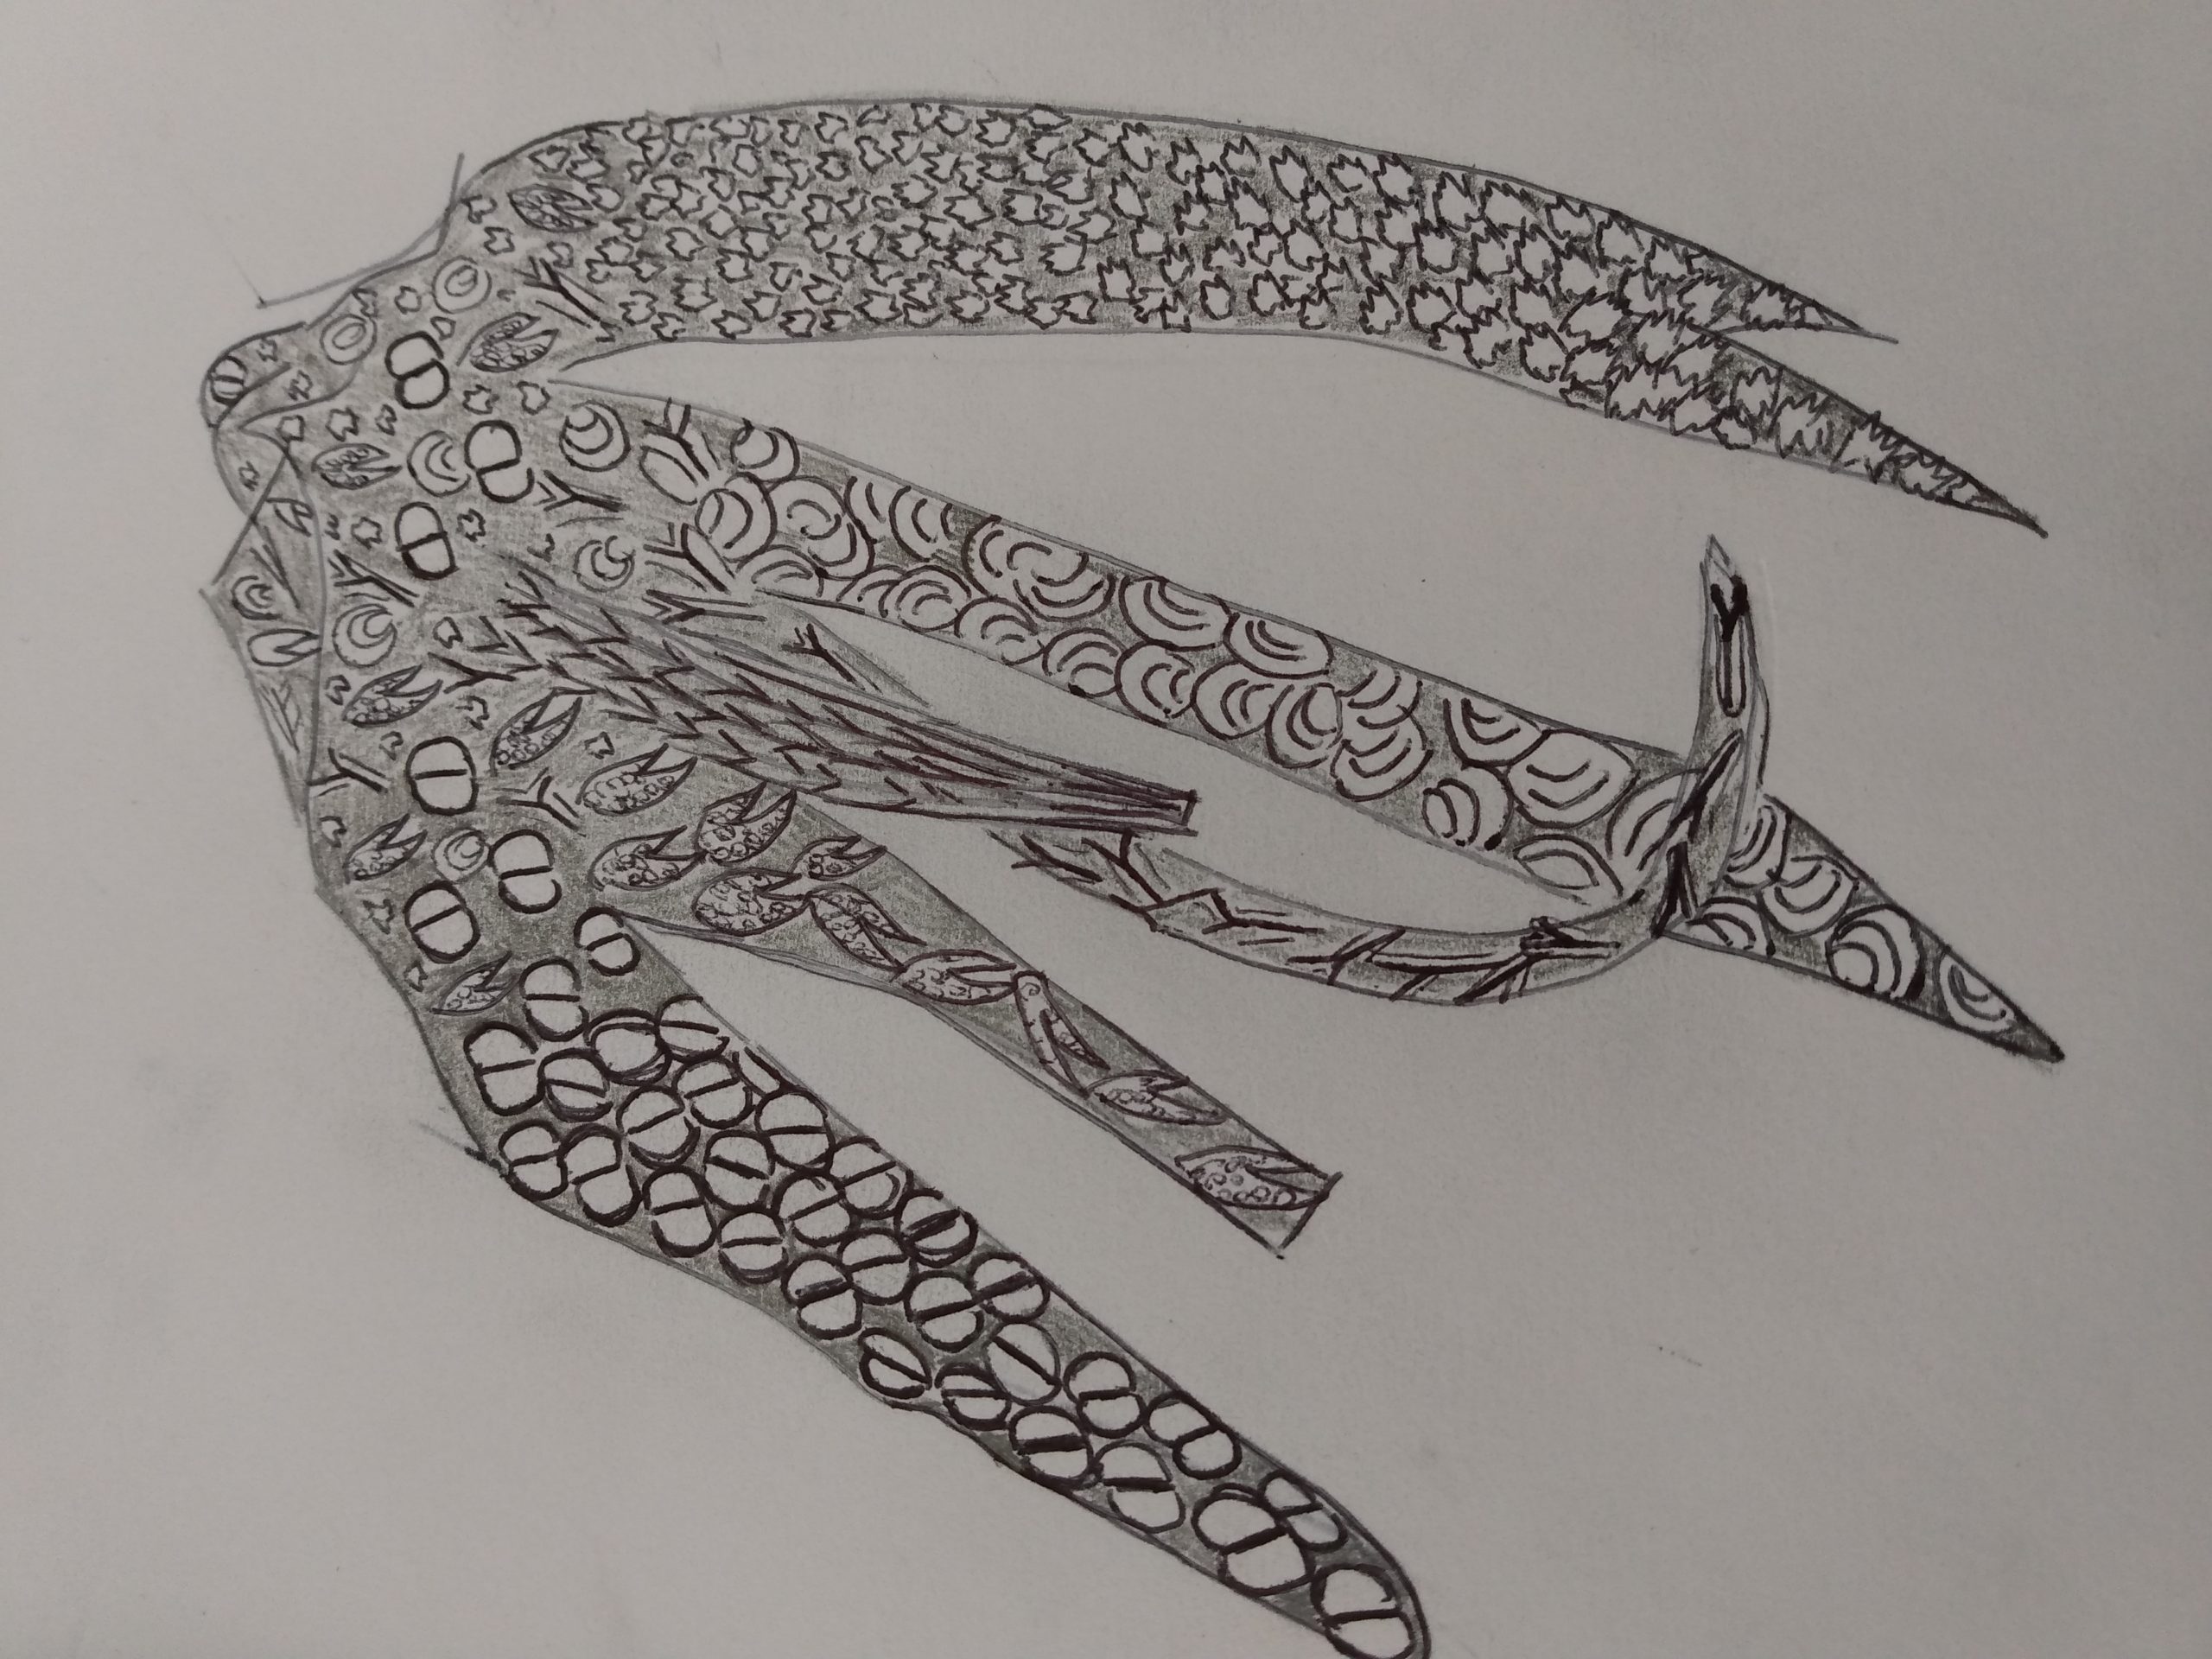 A charcoal black and white sketch of some seaweed floating on its left side. On each of its six strands, there is a different shell-like pattern.